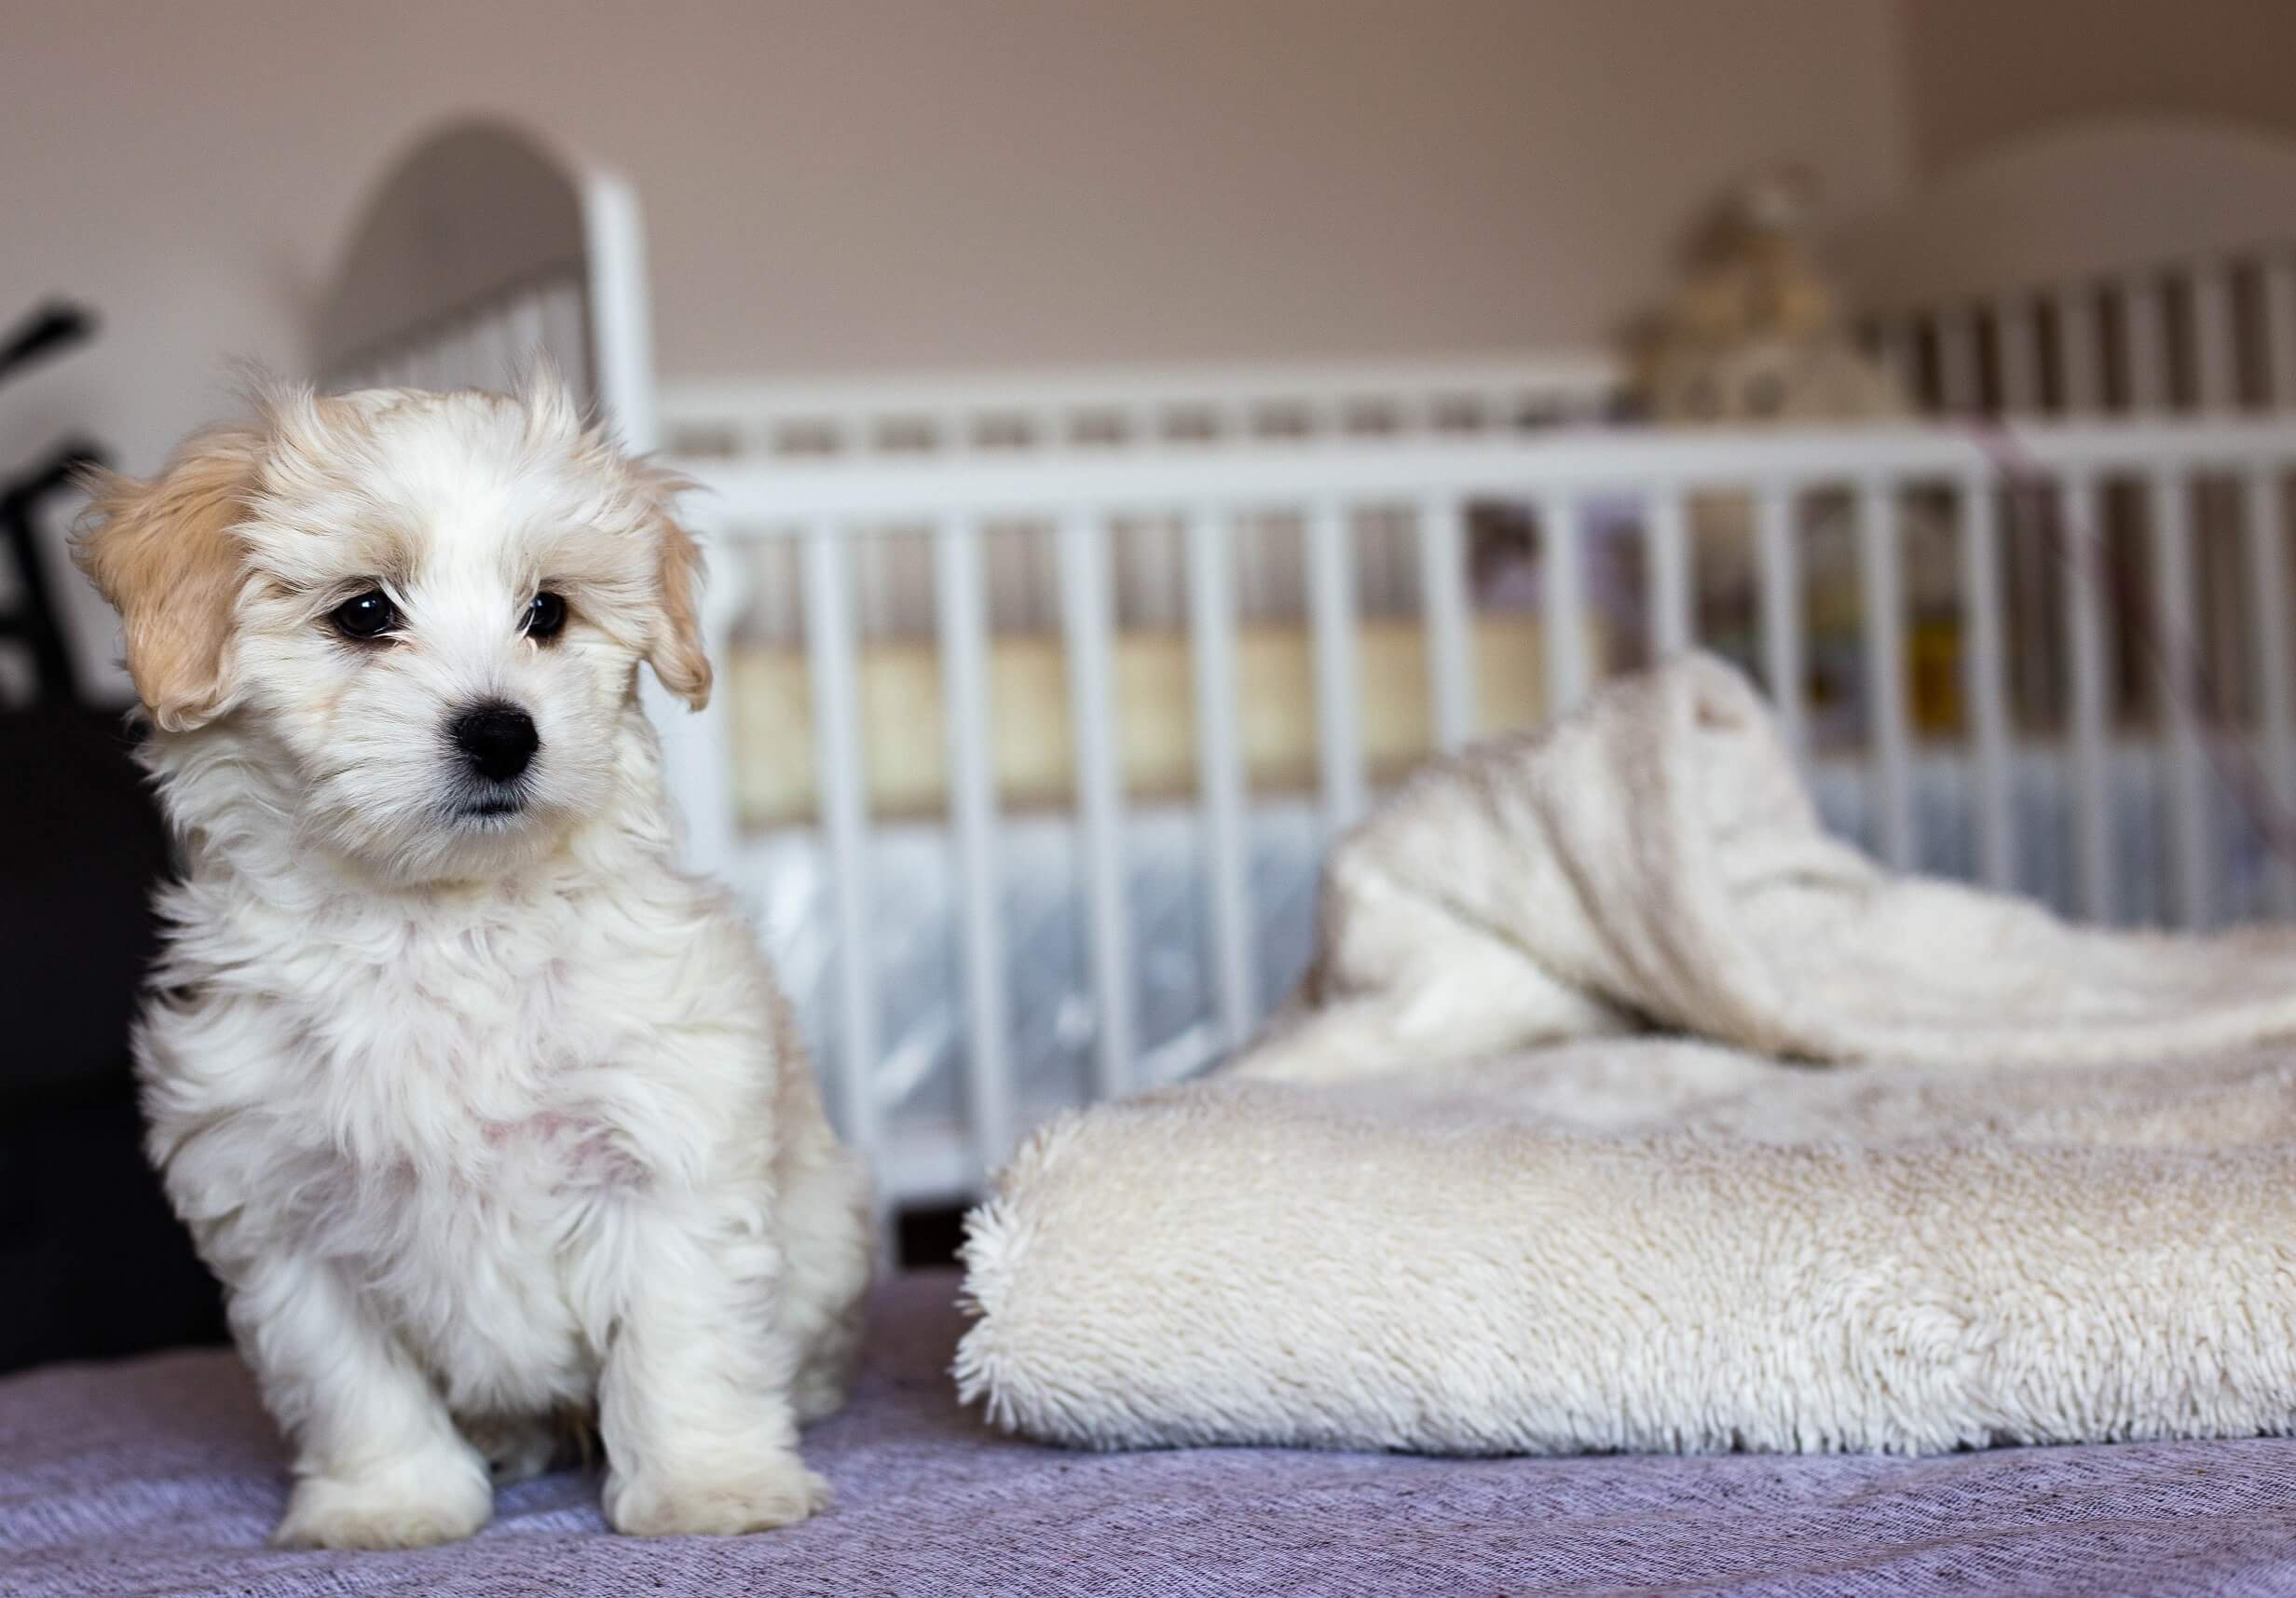 A puppy in a baby's bedroom.